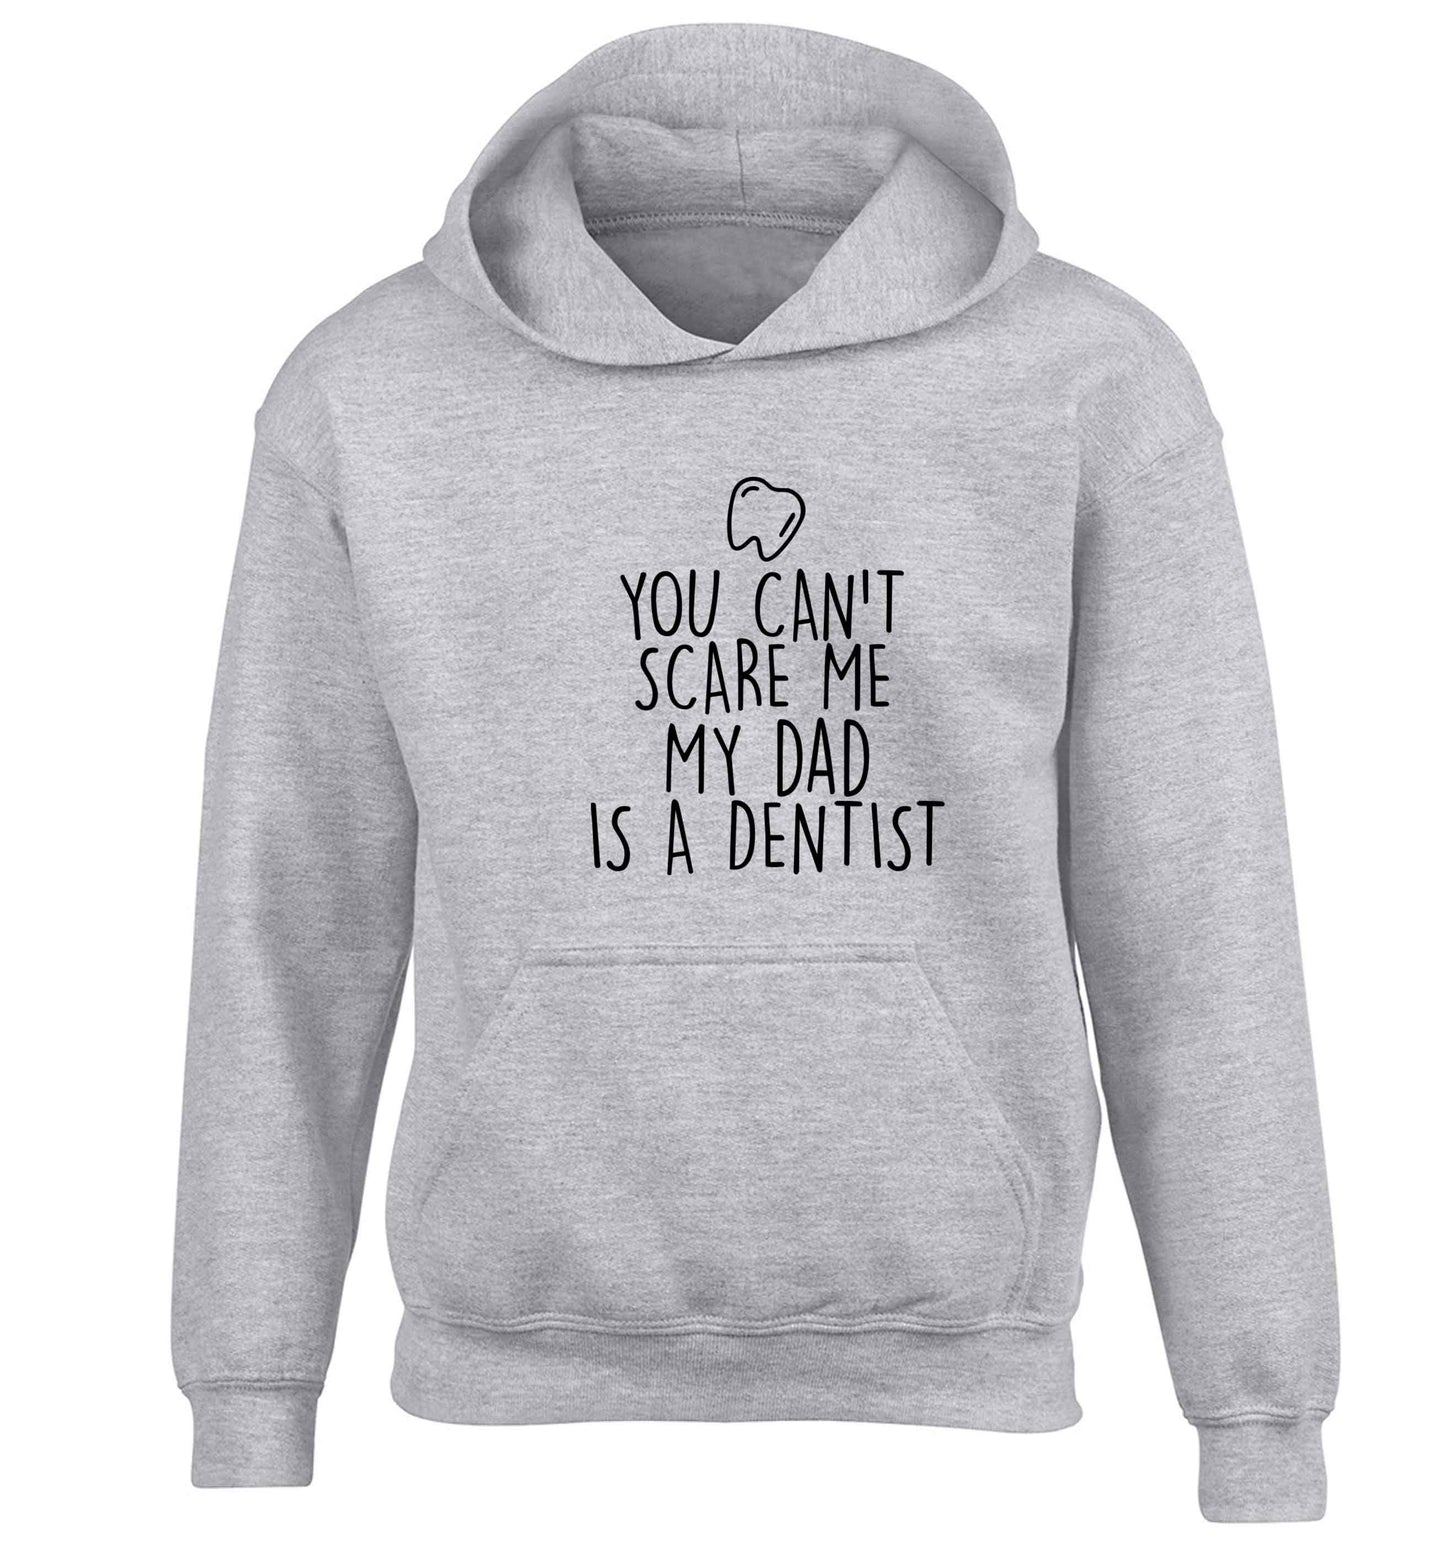 You can't scare me my dad is a dentist children's grey hoodie 12-13 Years